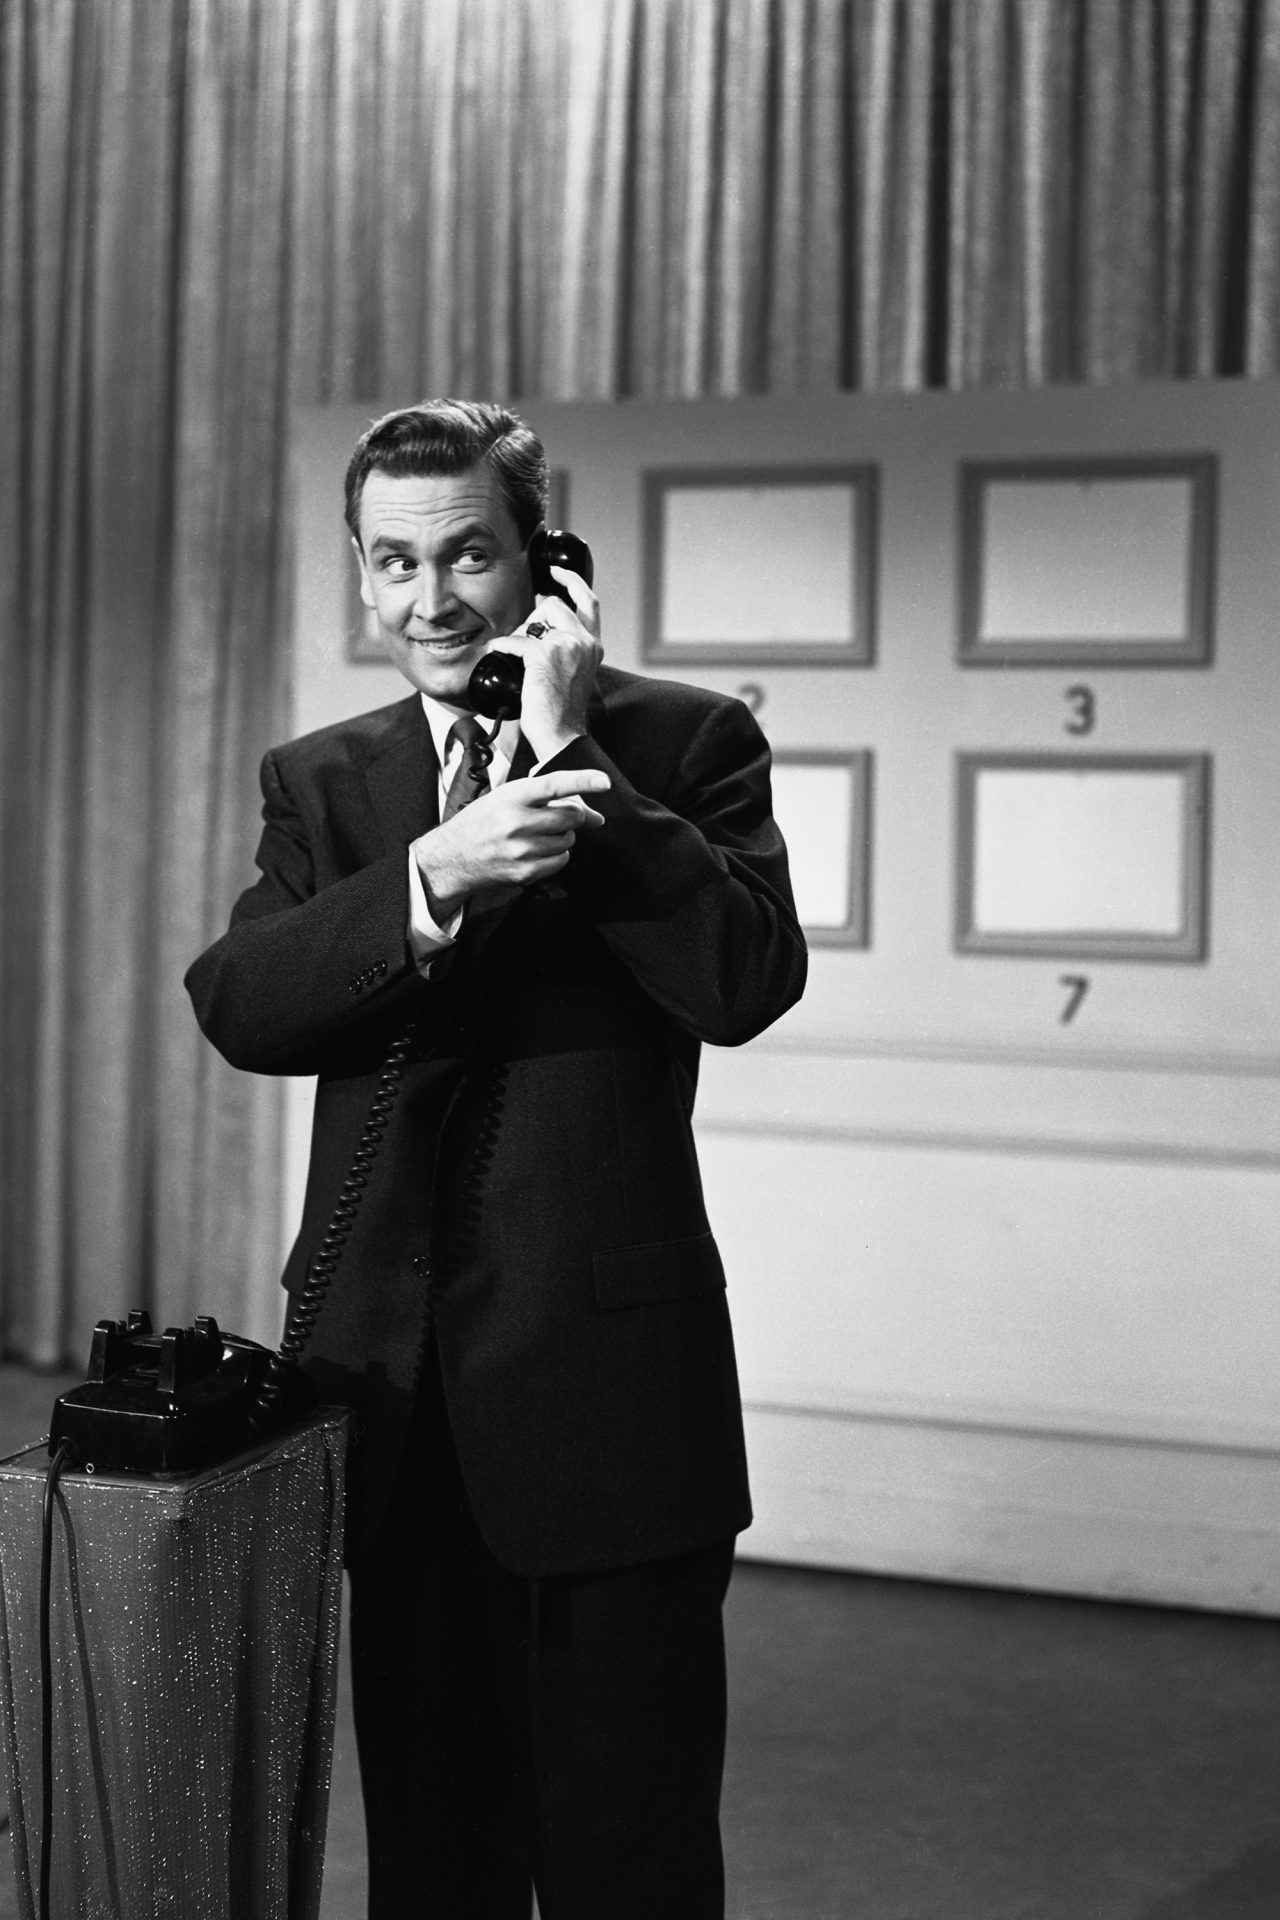 The first game show hosted by Bob Barker was ‘Truth or Consequences’